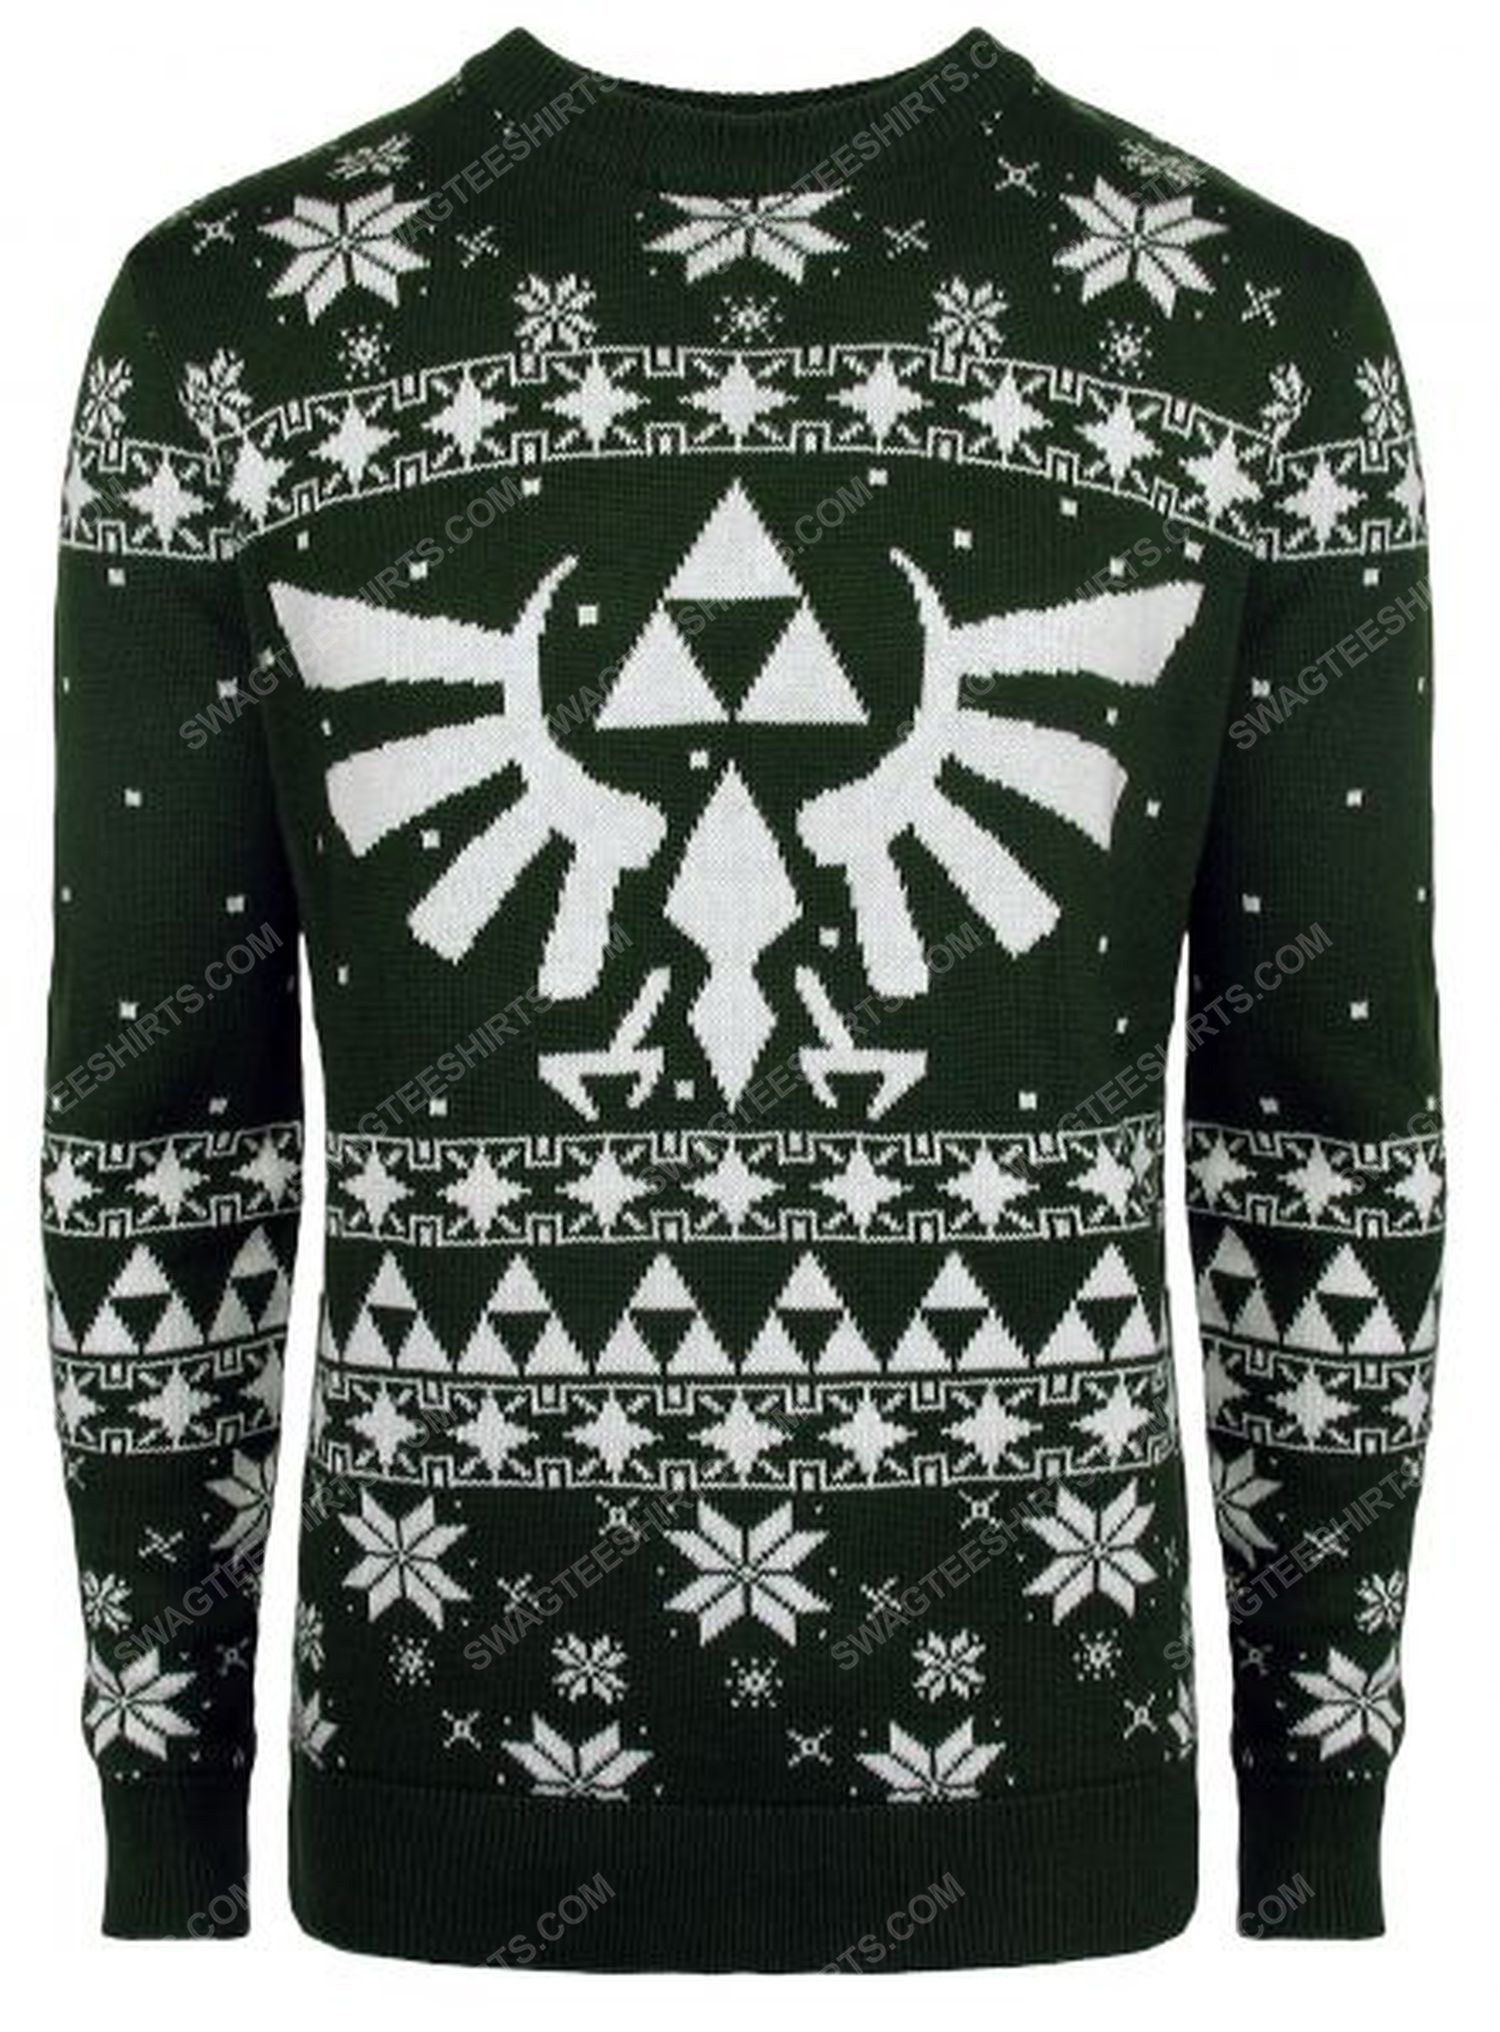 [special edition] Christmas holiday legend of zeldafull print ugly christmas sweater – maria